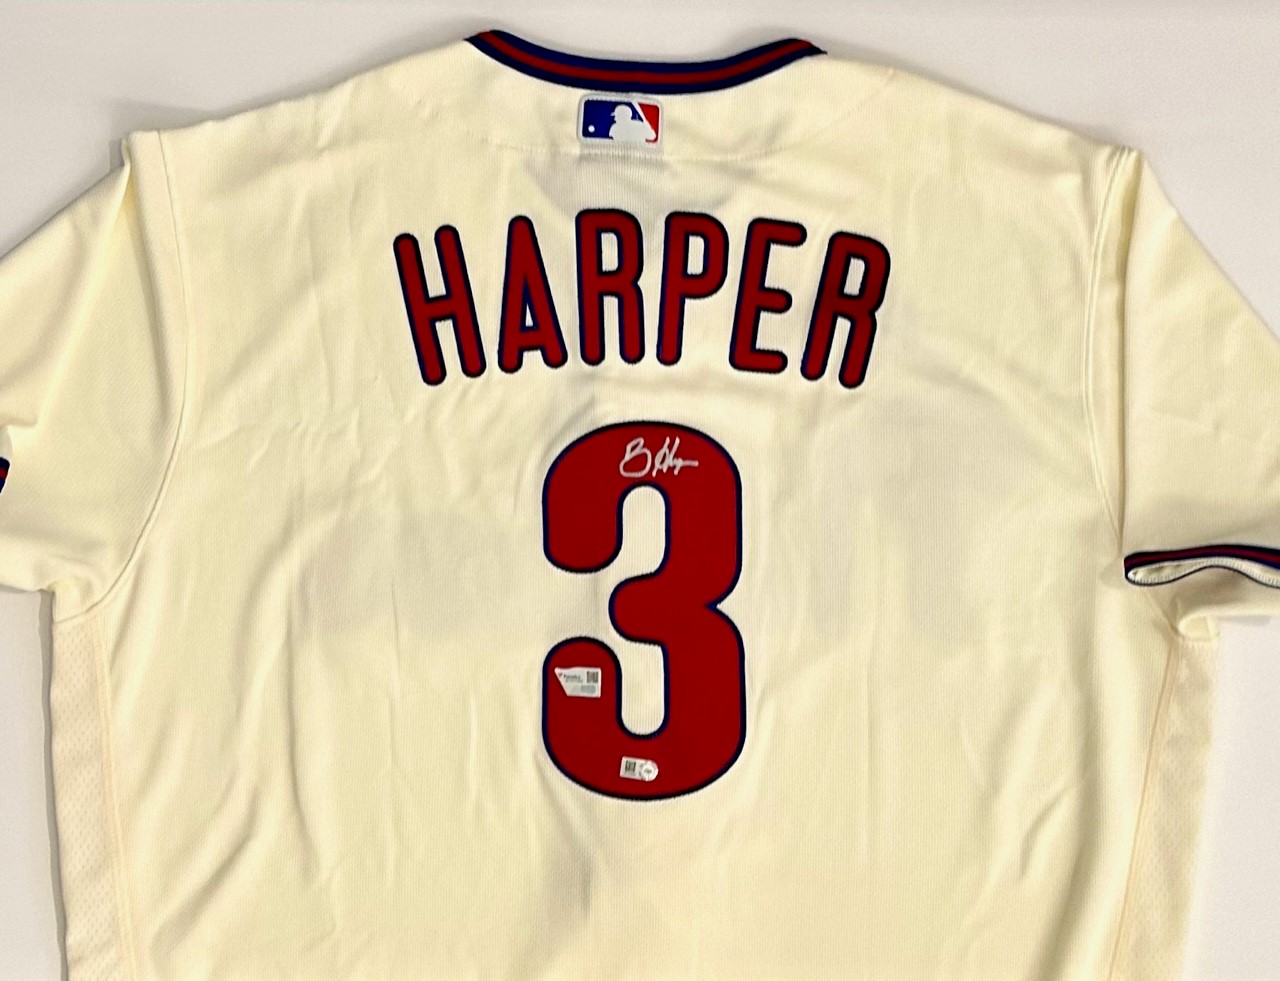 Bryce Harper Autographed White Nike Authentic Baseball Jersey